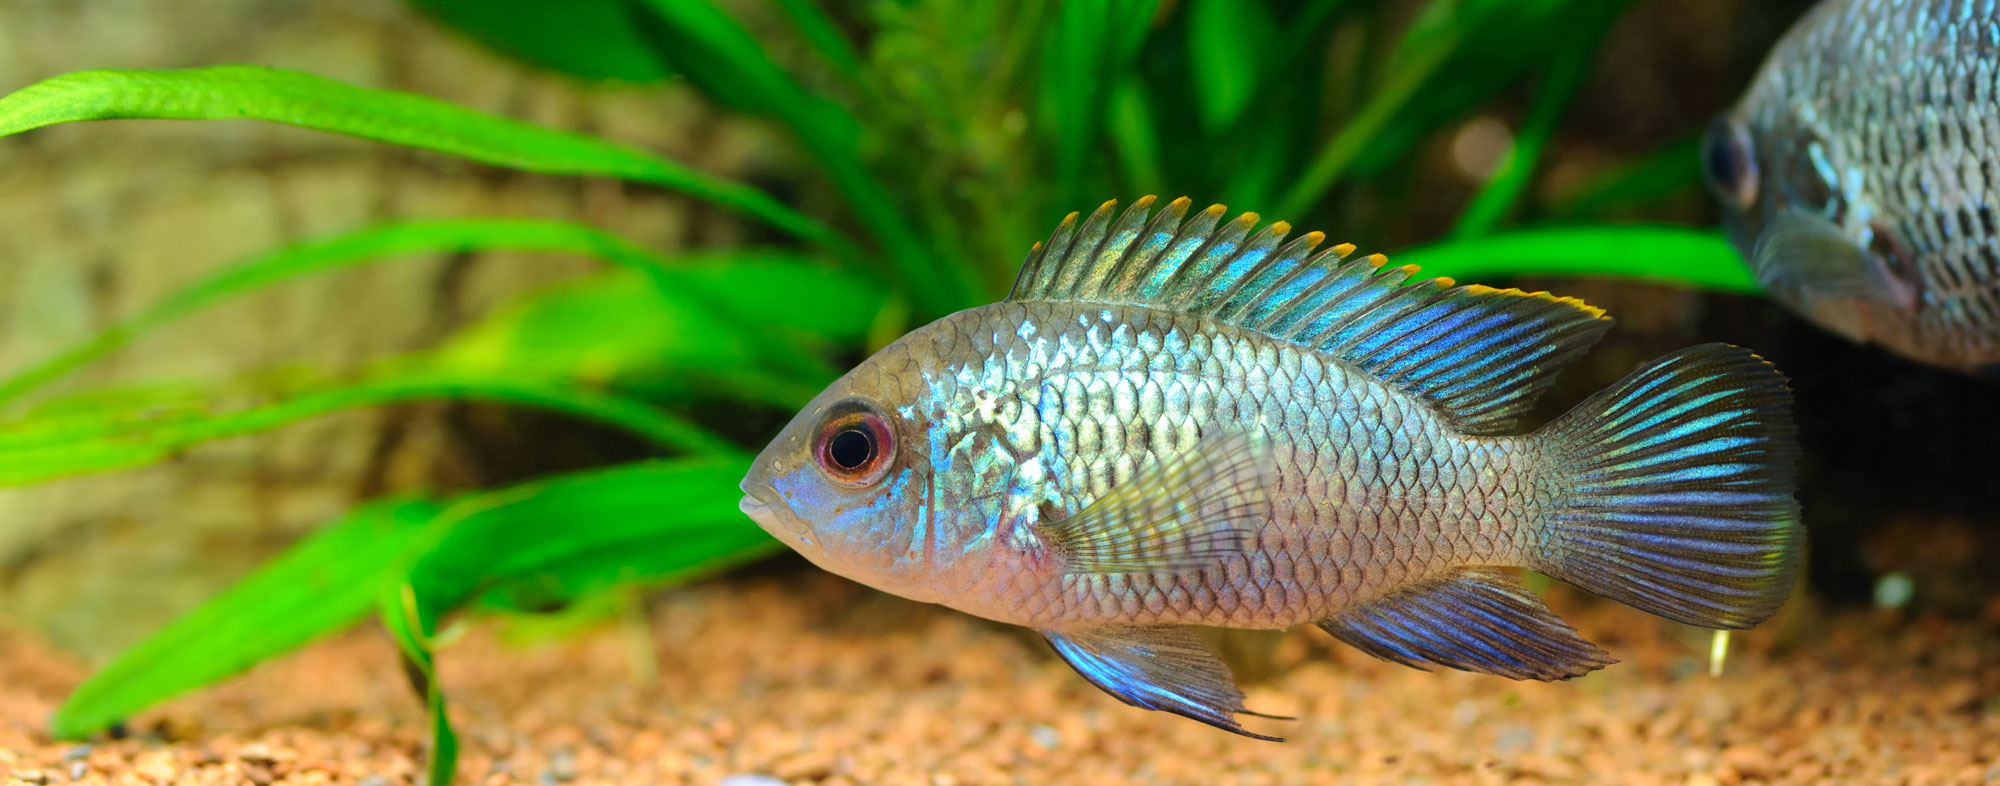 Ideally, the fish in your tank should have access to 8 hours of light